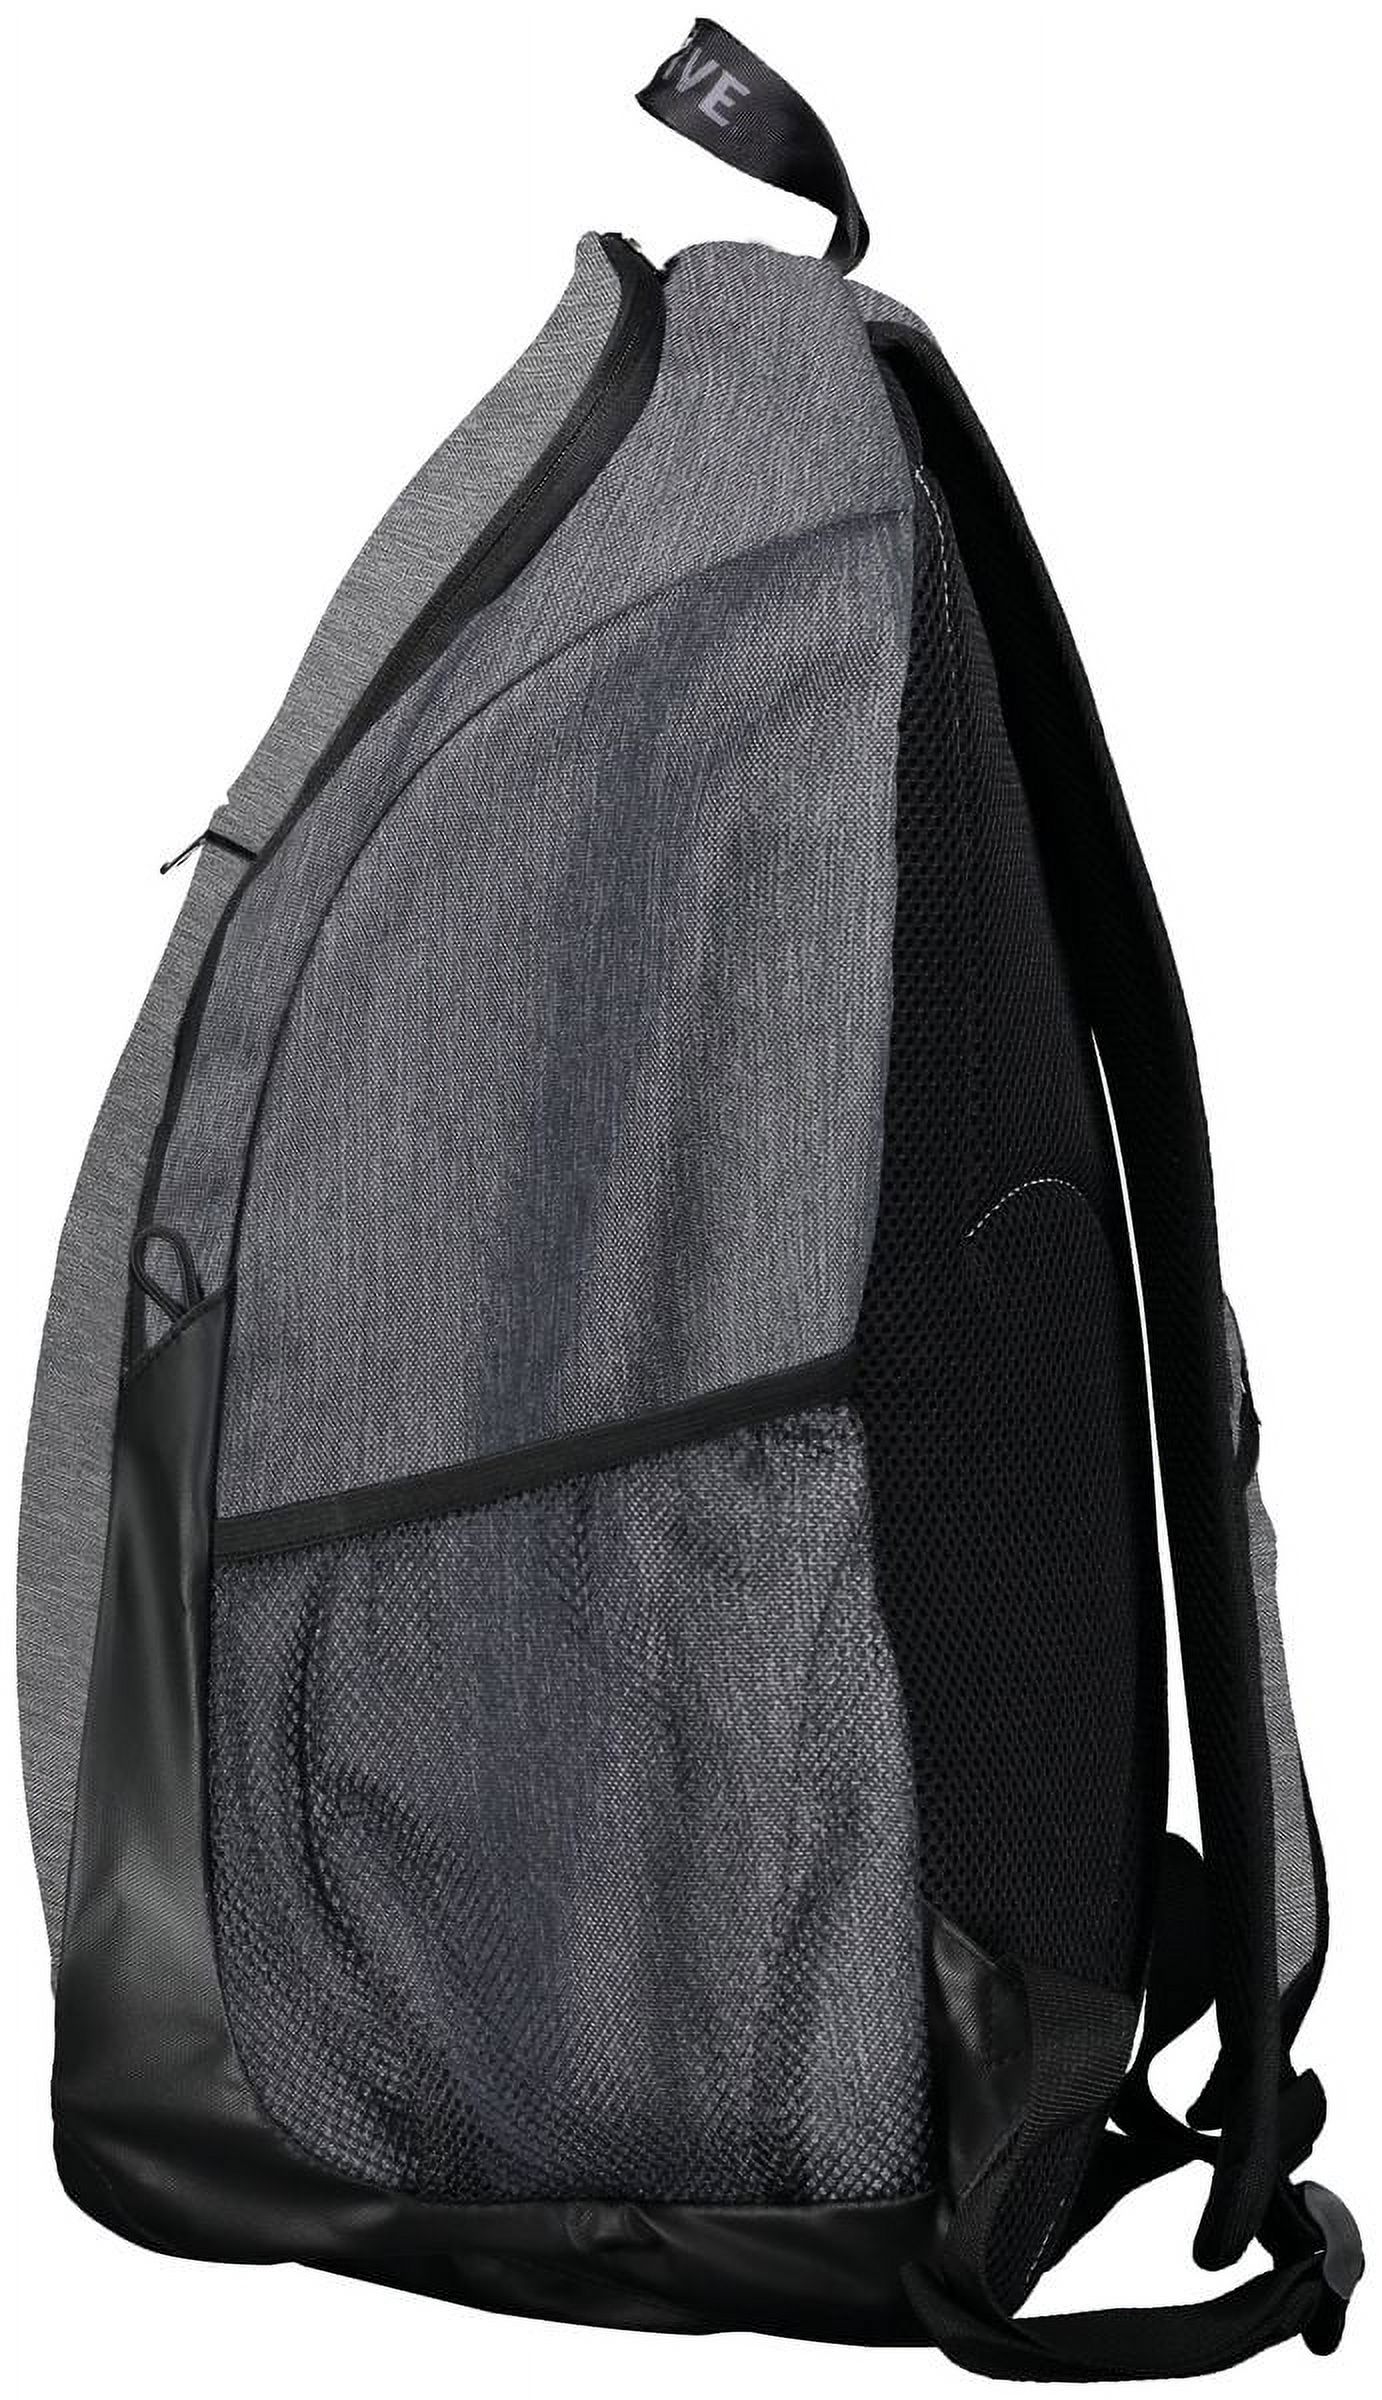 High Five 327895.E83.OS Free Form Backpack, Carbon Heather - One Size - image 3 of 5